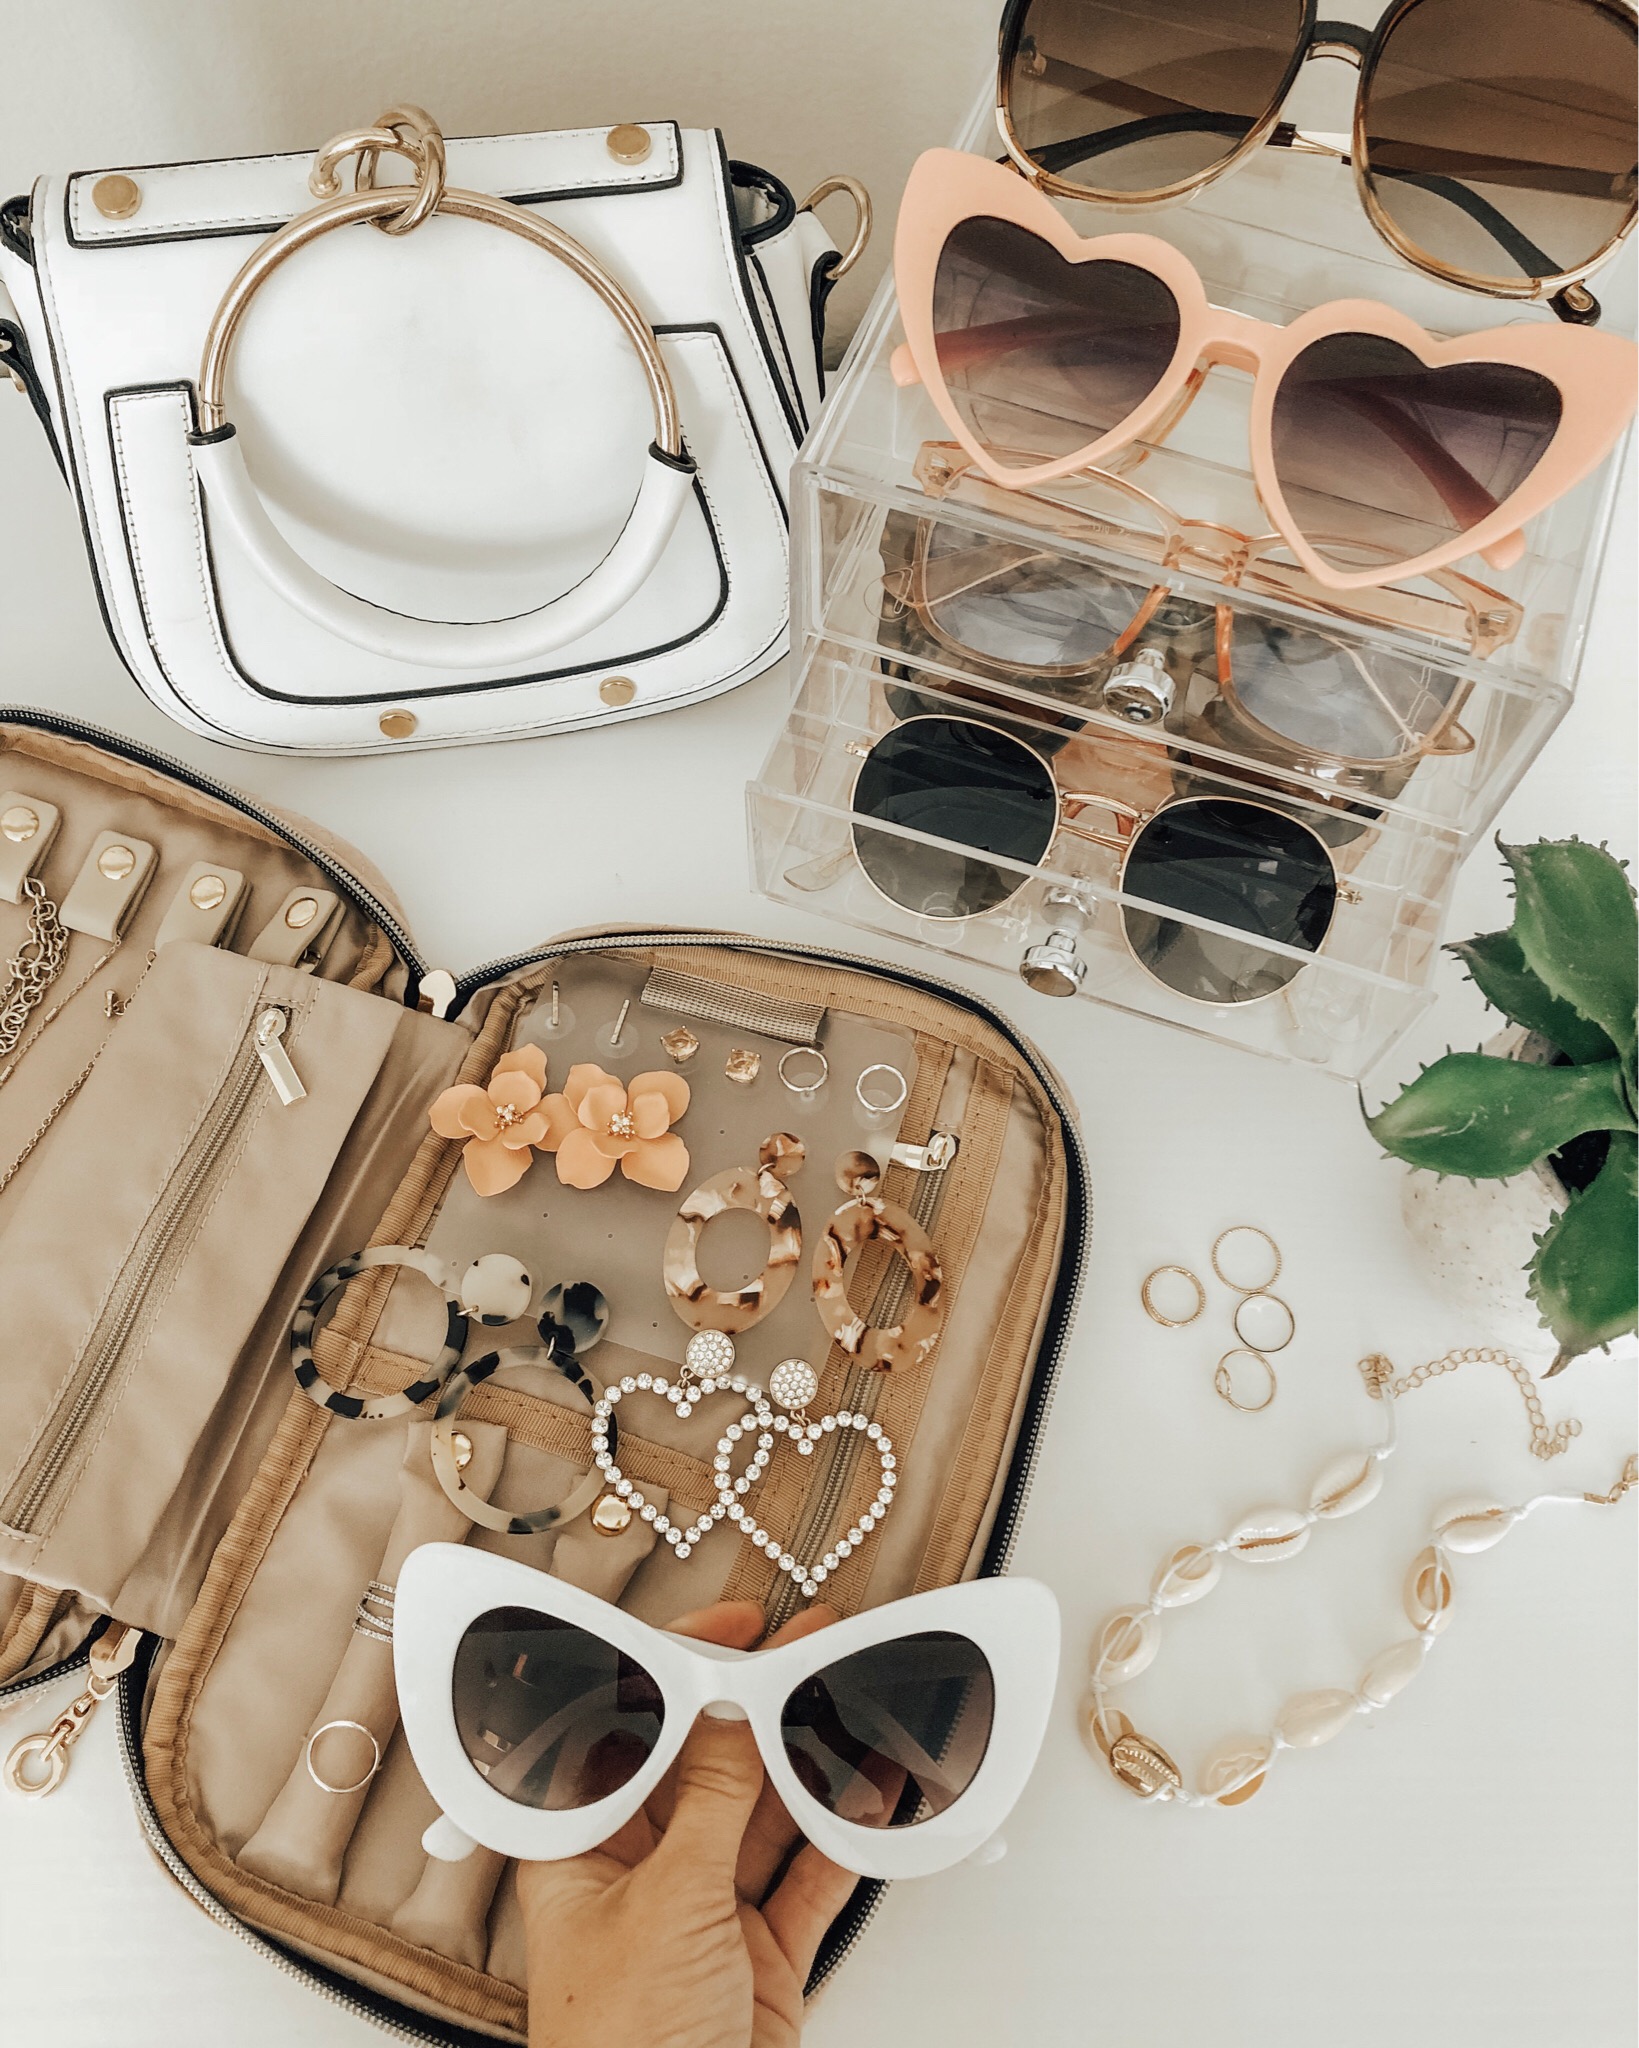 AMAZON FINDS- Jaclyn De Leon Style + Must have items from sunglasses and a jewelry travel case to swimsuits and designer dupe handbags. All items are Amazon prime with free shipping and several are under $10. One stop shopping for all your needs